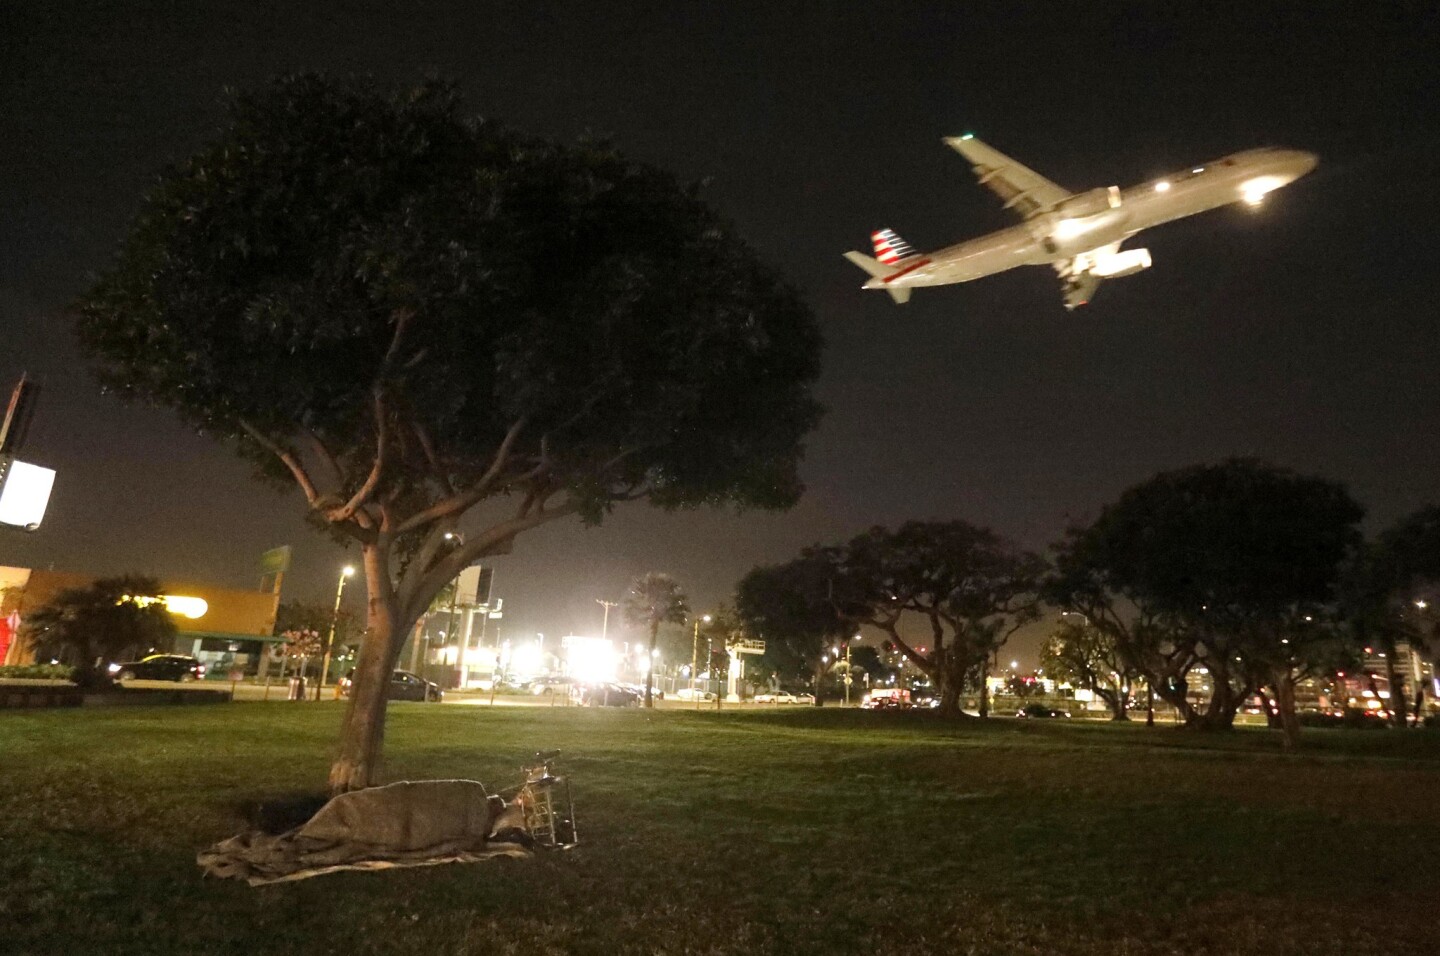 A homeless person sleeps in a park at the corner of W. 92nd Street and Sepulveda Blvd. as a plane comes in for a landing at the Los Angeles International Airport in Westchester.